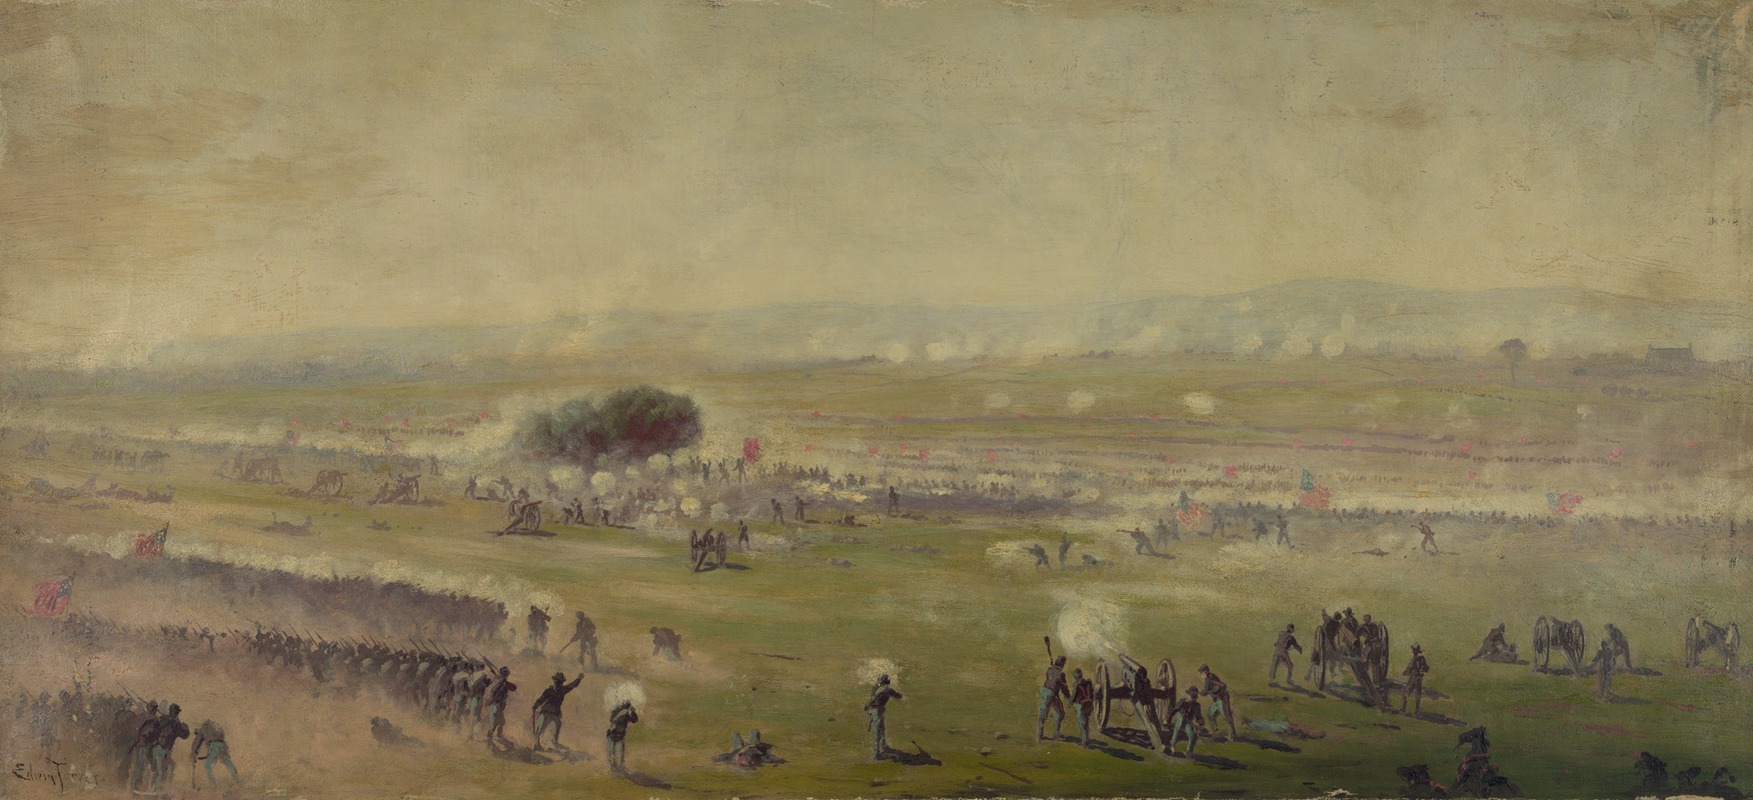 Edwin Forbes - Picketts charge from a position on the enemys line looking toward the Union lines, Zieglers grove on the left, clump of trees on right